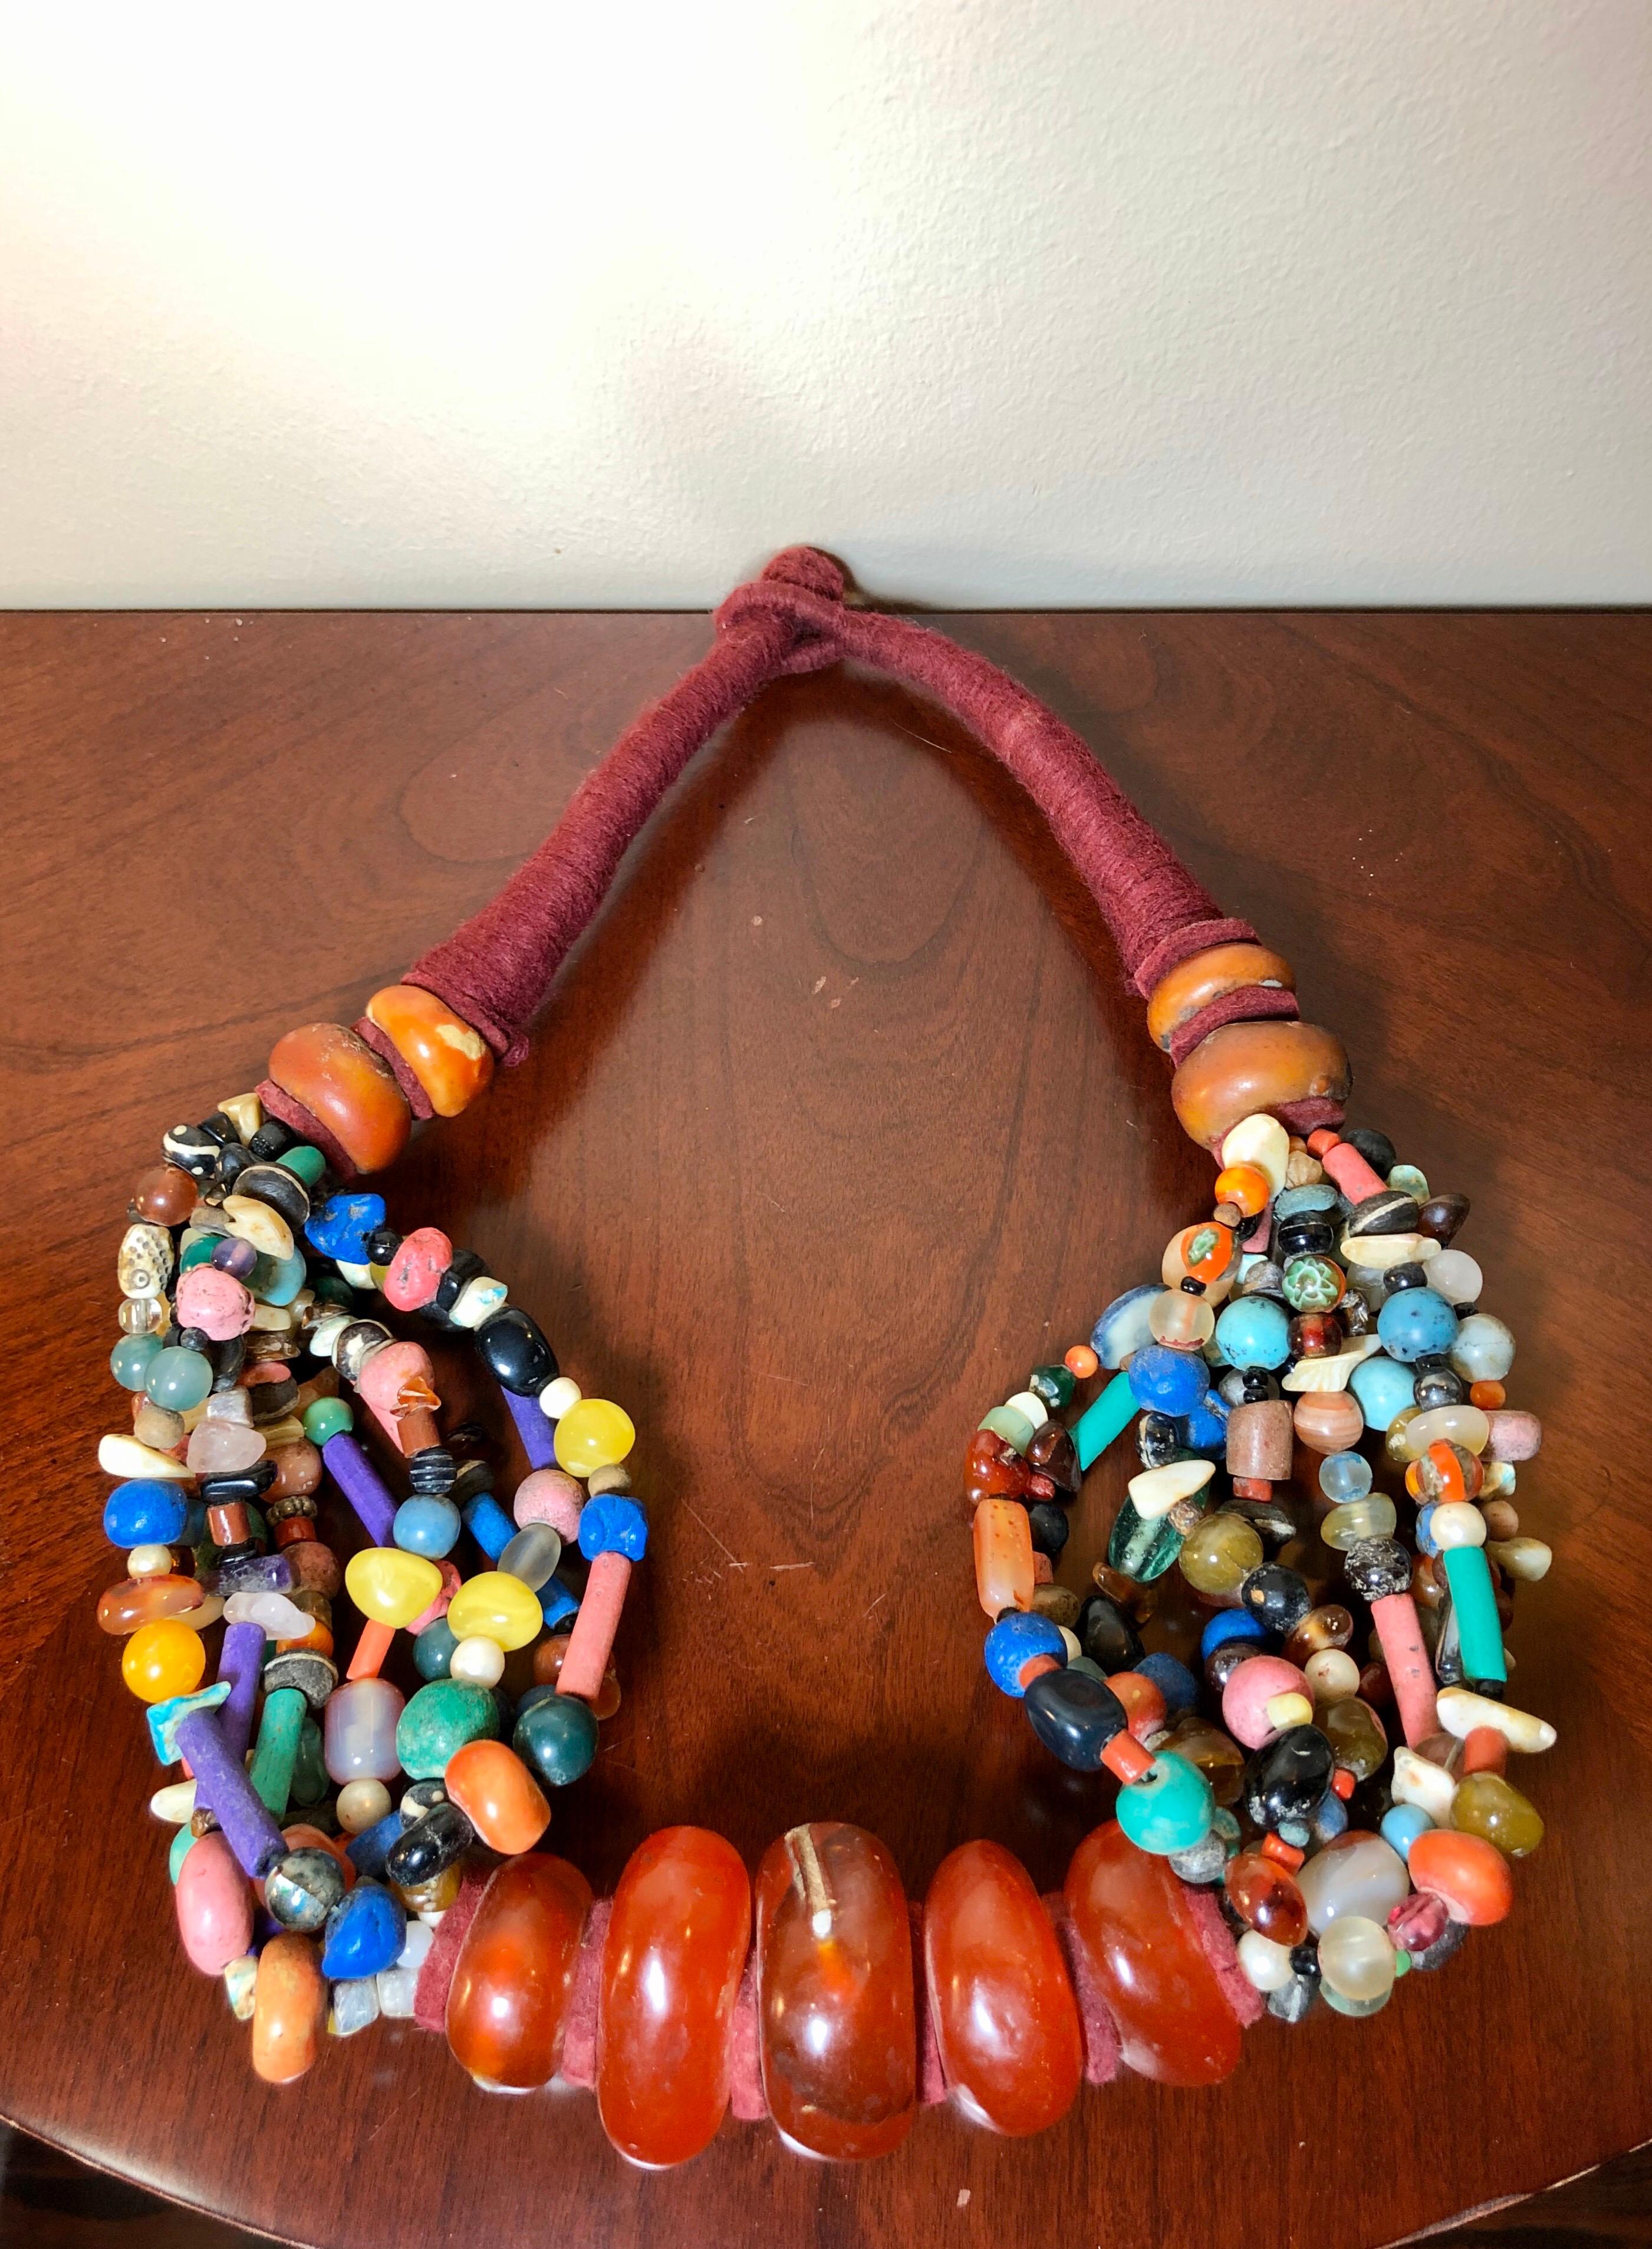 This ostentatious Moroccan Copal beaded necklace glows as if lit from within. The amber copal is magical, with greater transparency than commonly found copal. Made in Zagora, Morocco, in the late 1970s-early 1980s, this necklace has many